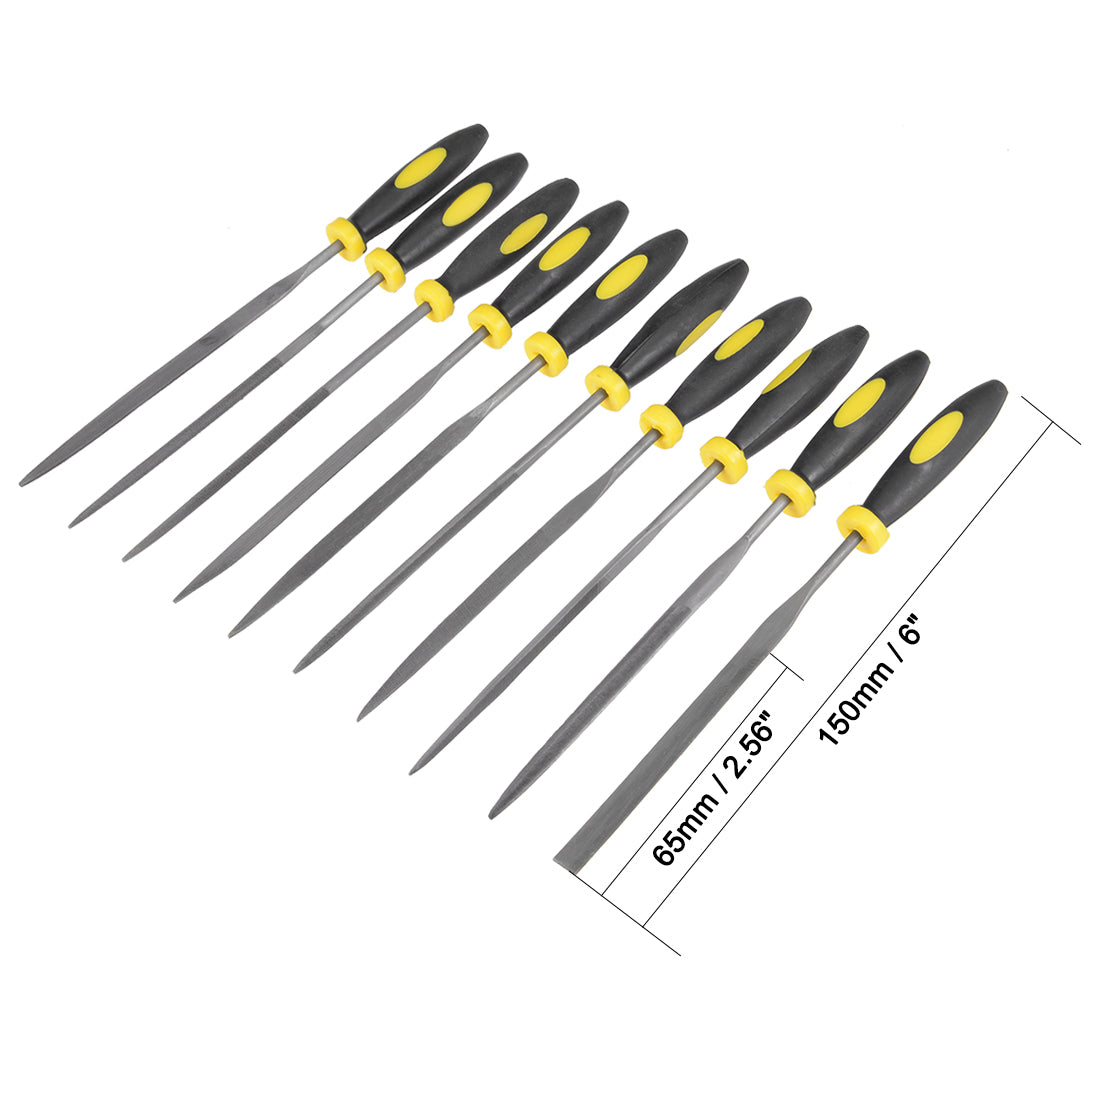 uxcell Uxcell 10Pcs Smooth Cut Bearing Steel Needle File Set with Rubber Handle, 3mm x 150mm